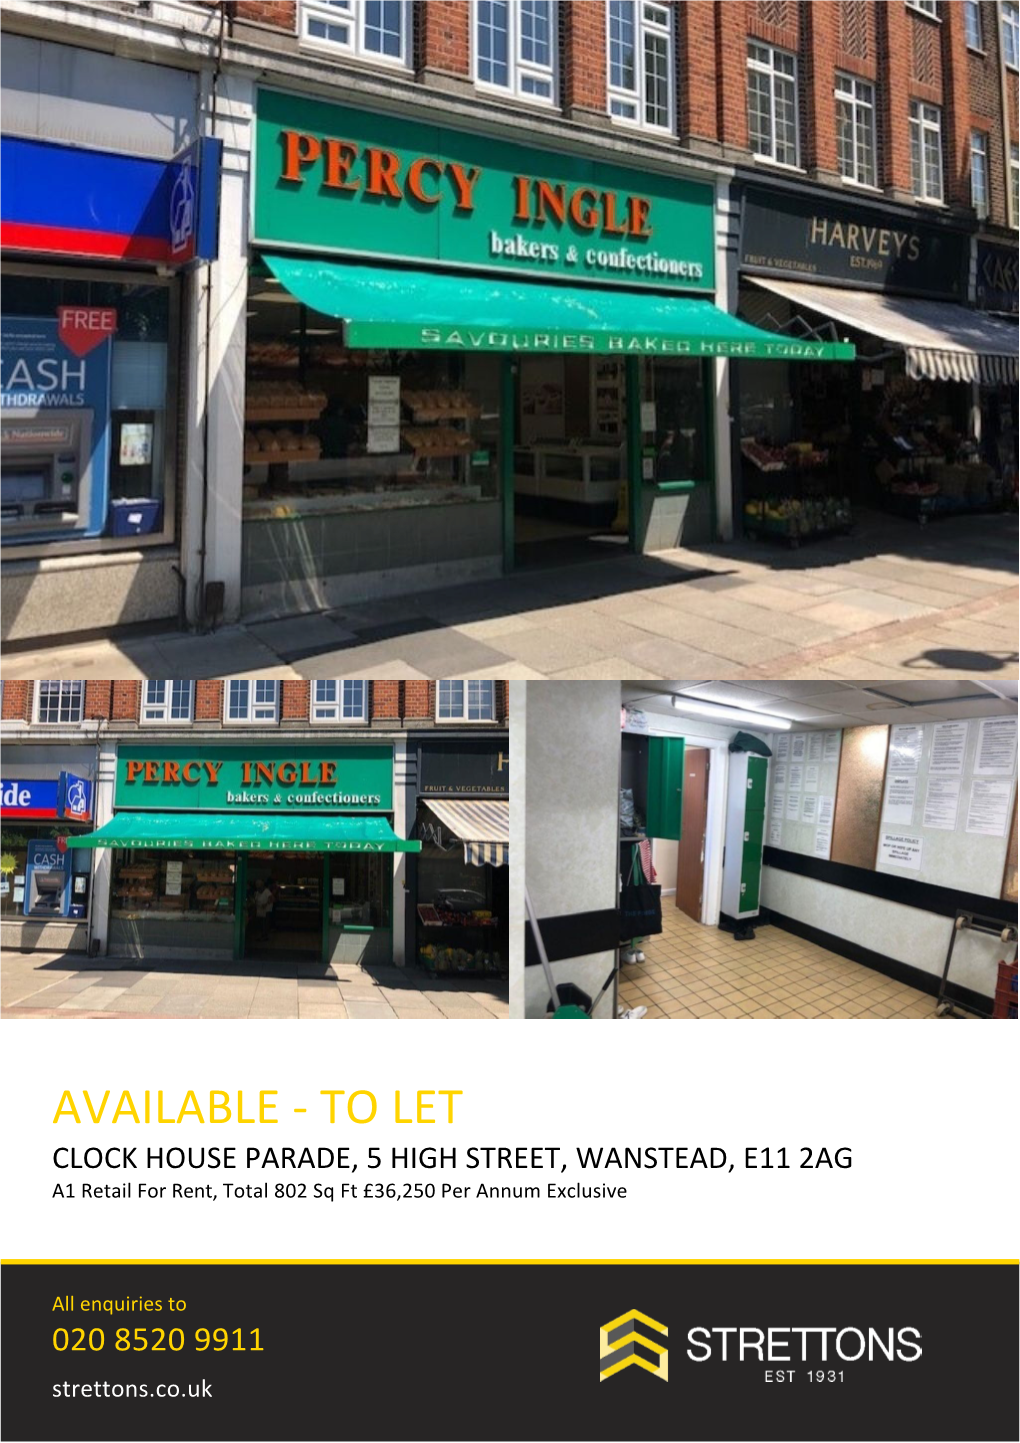 AVAILABLE ‐ to LET CLOCK HOUSE PARADE, 5 HIGH STREET, WANSTEAD, E11 2AG A1 Retail for Rent, Total 802 Sq Ft £36,250 Per Annum Exclusive